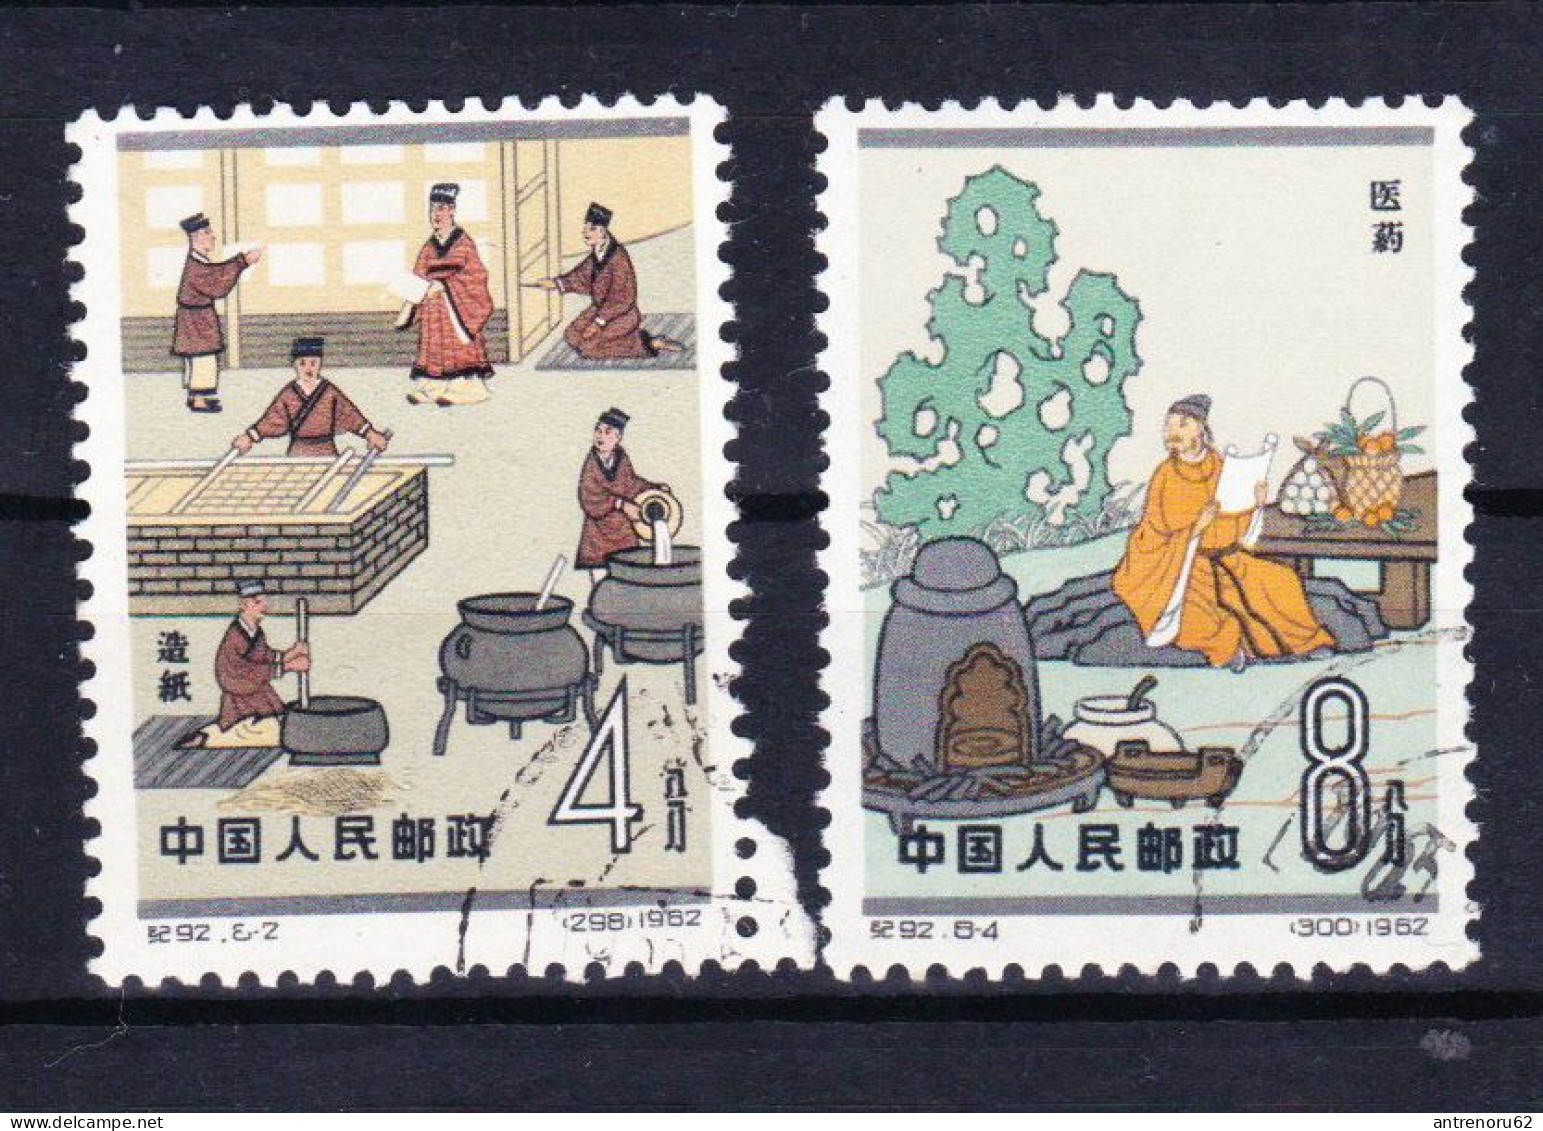 STAMPS-1962-CHINA-USED-SEE-SCAN - Oblitérés